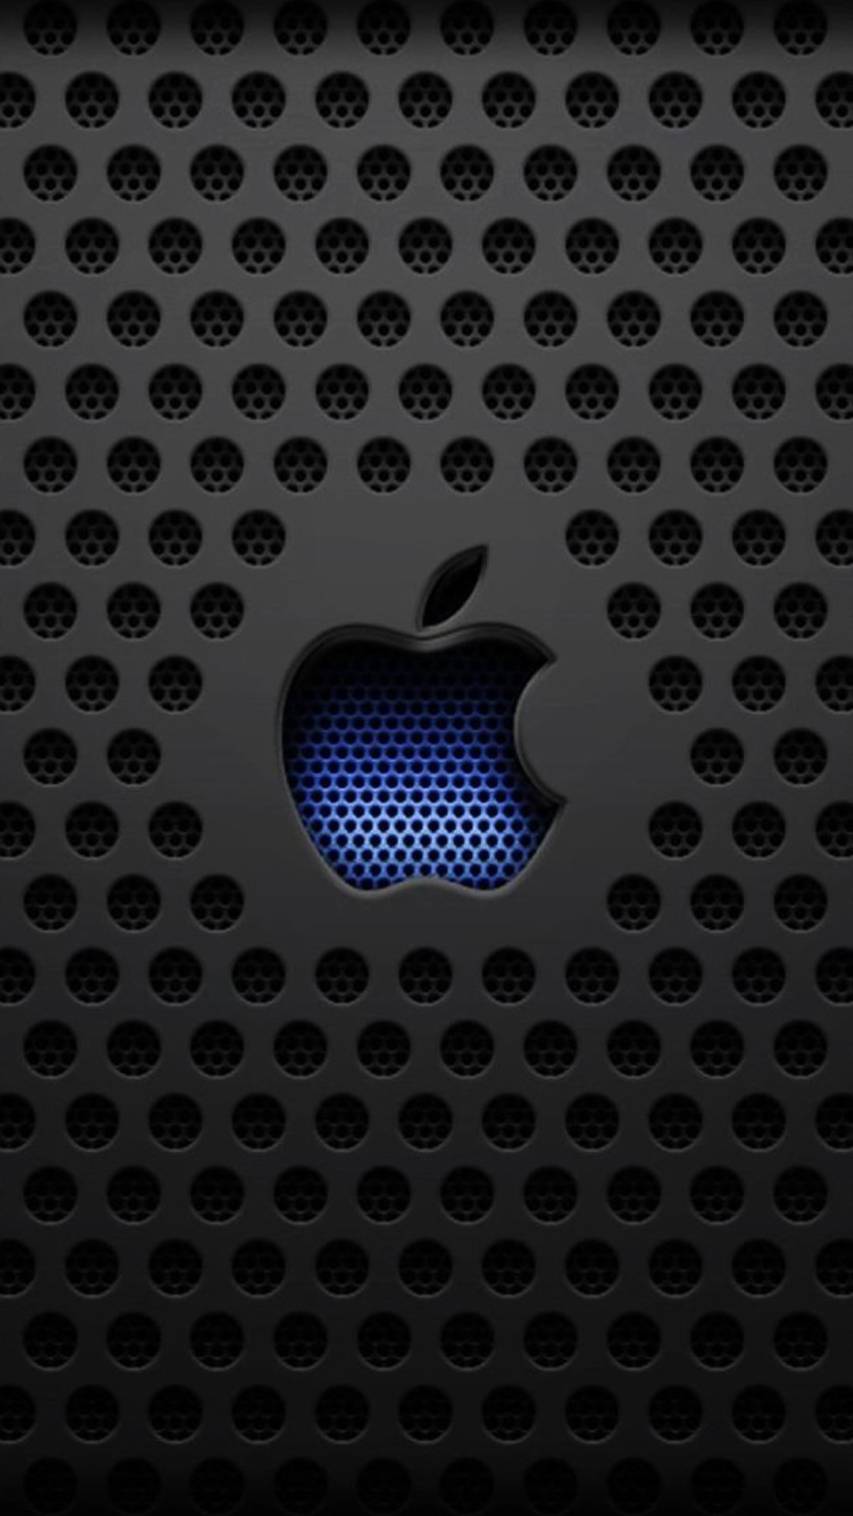 Cool Apple logo Backgrounds for iPhone